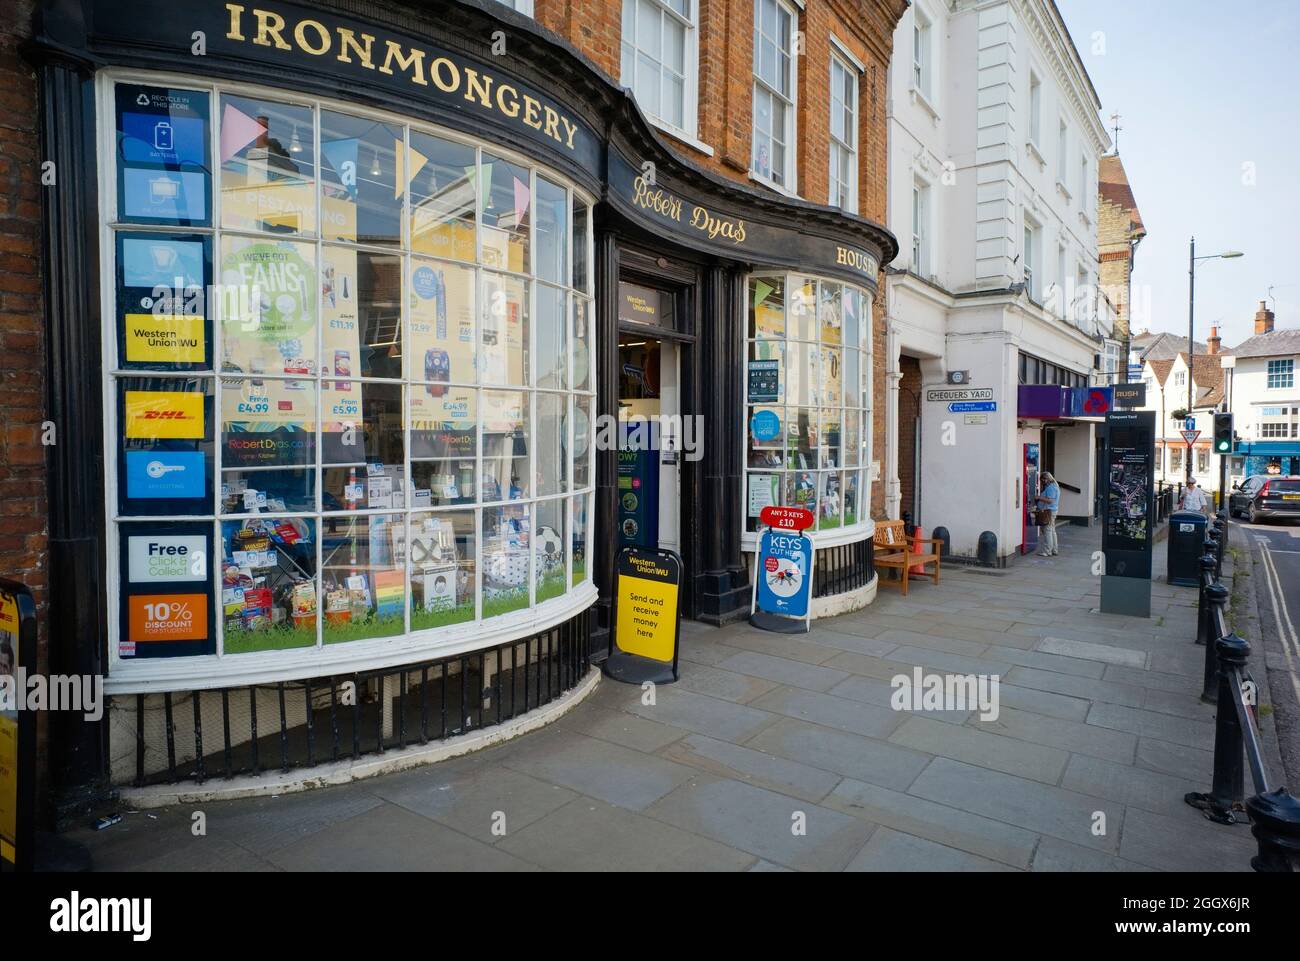 Robert Dyas ironmongery shop with double bow fronts in the High Street, Dorking Stock Photo